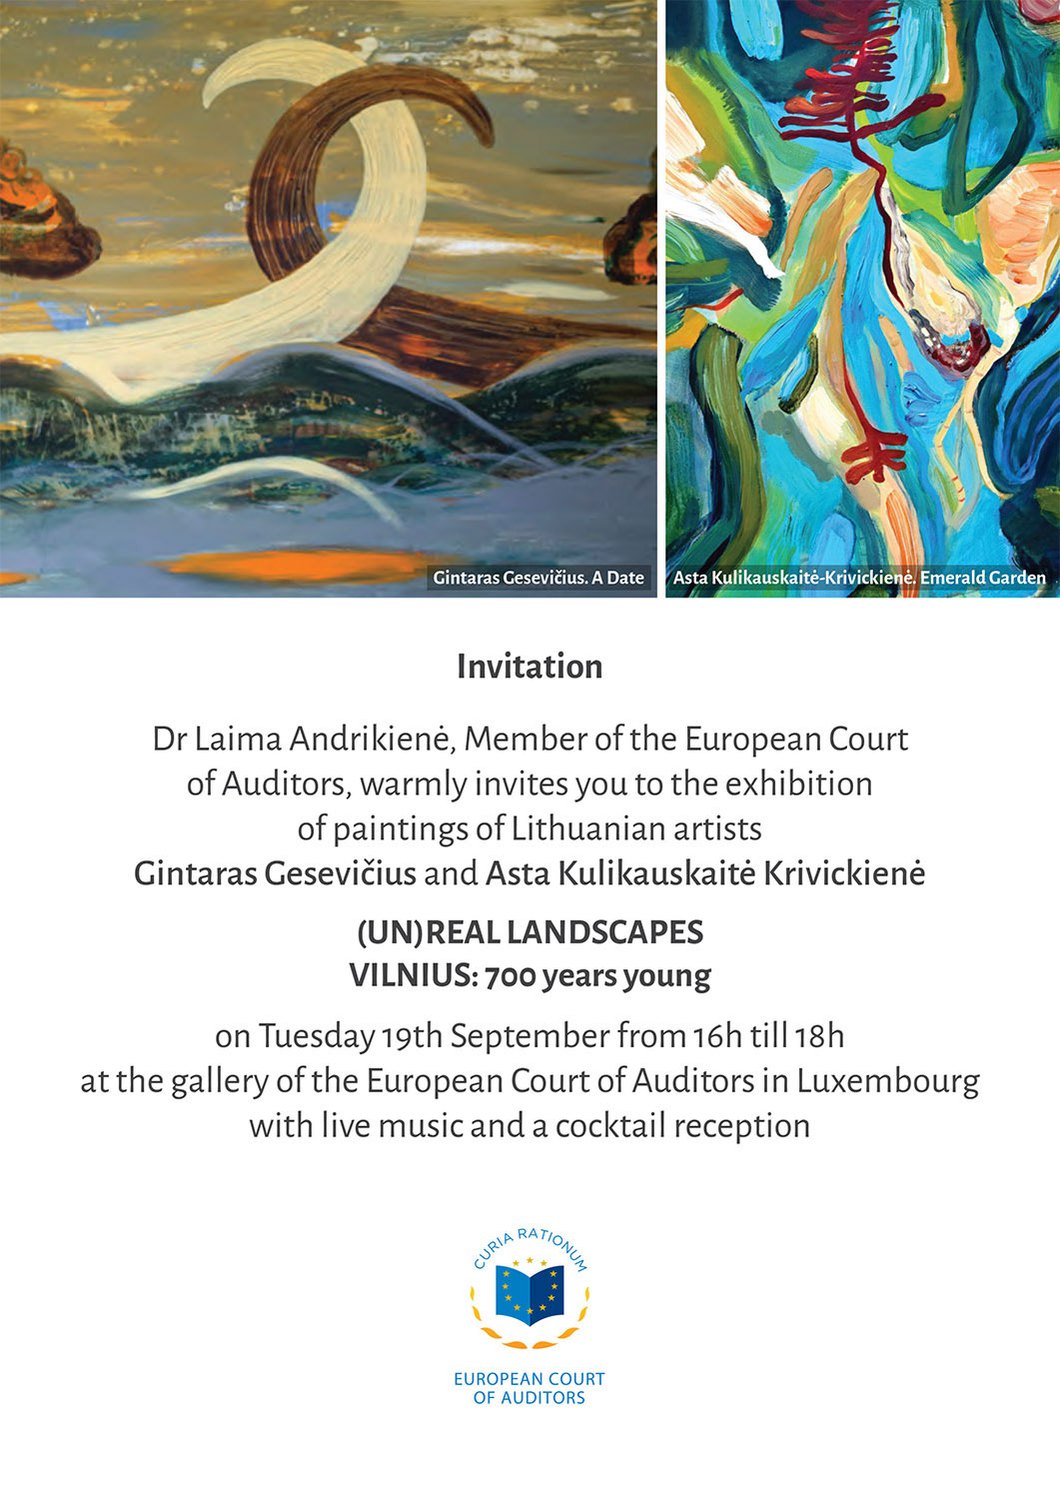 The painting exhibition of Lithuanian artists Asta Kulikauskaite Krivickiene and Gintaras Gesevicius in Court of Auditors in Luxembourg.